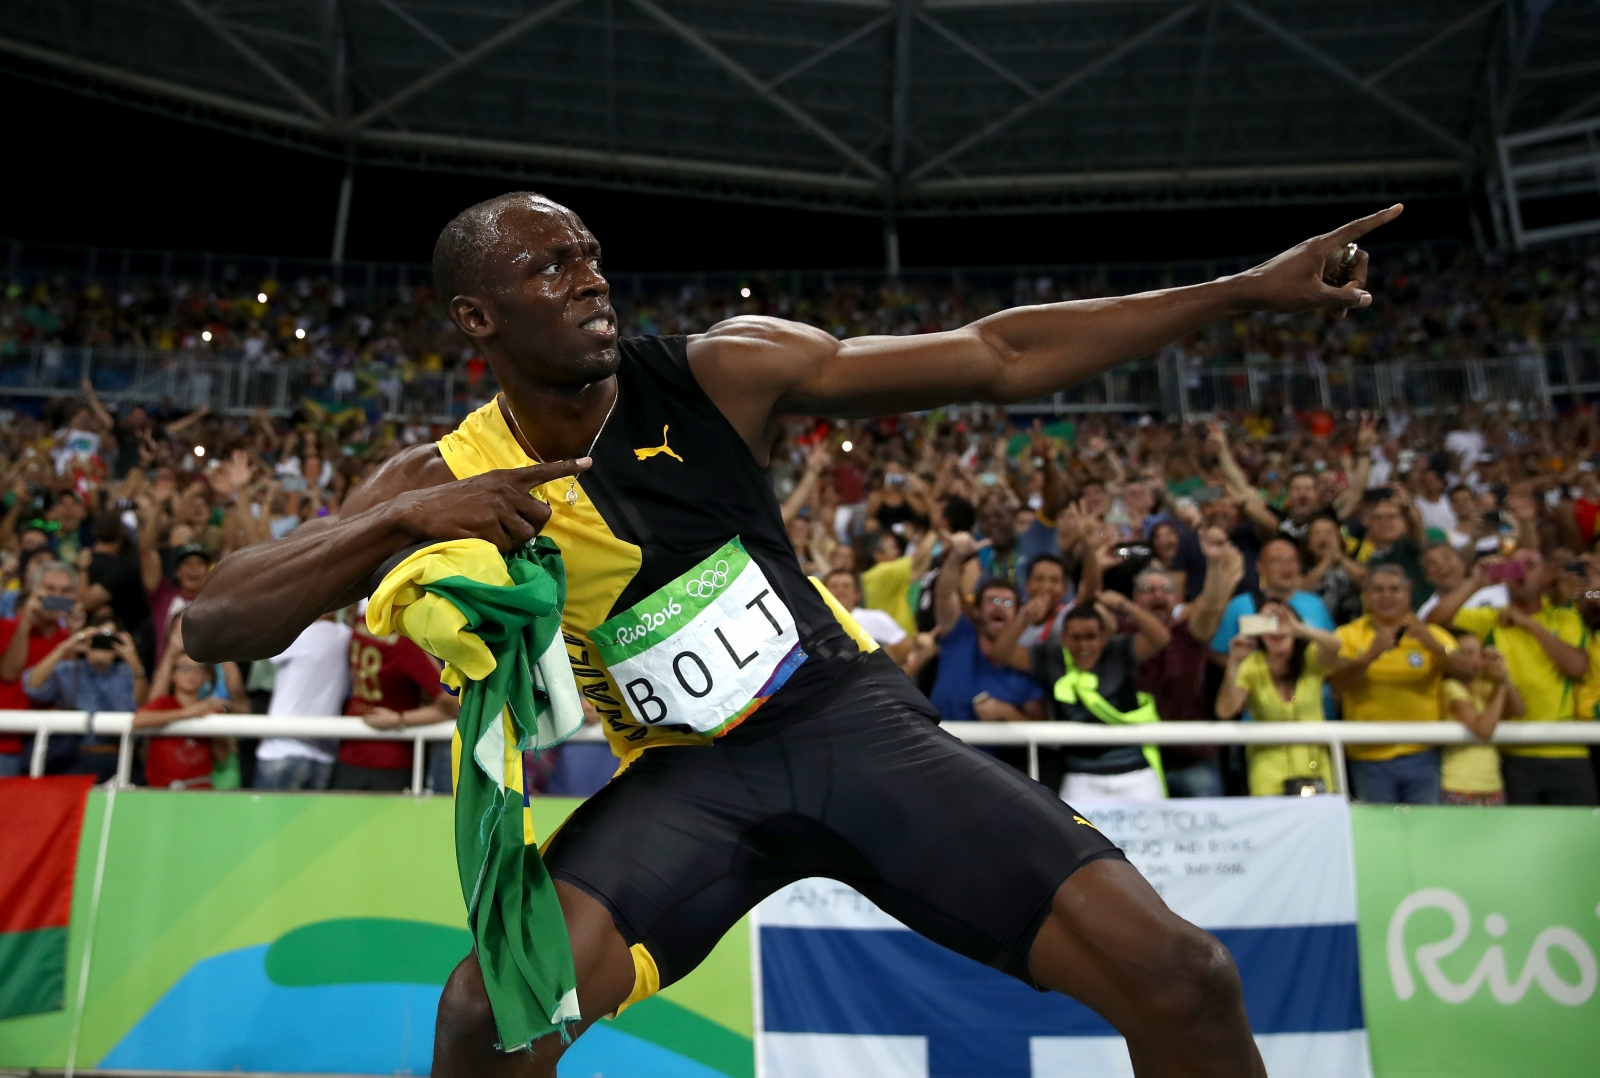 Who is Usain Bolt? Net worth and facts about the Olympic sprint legend